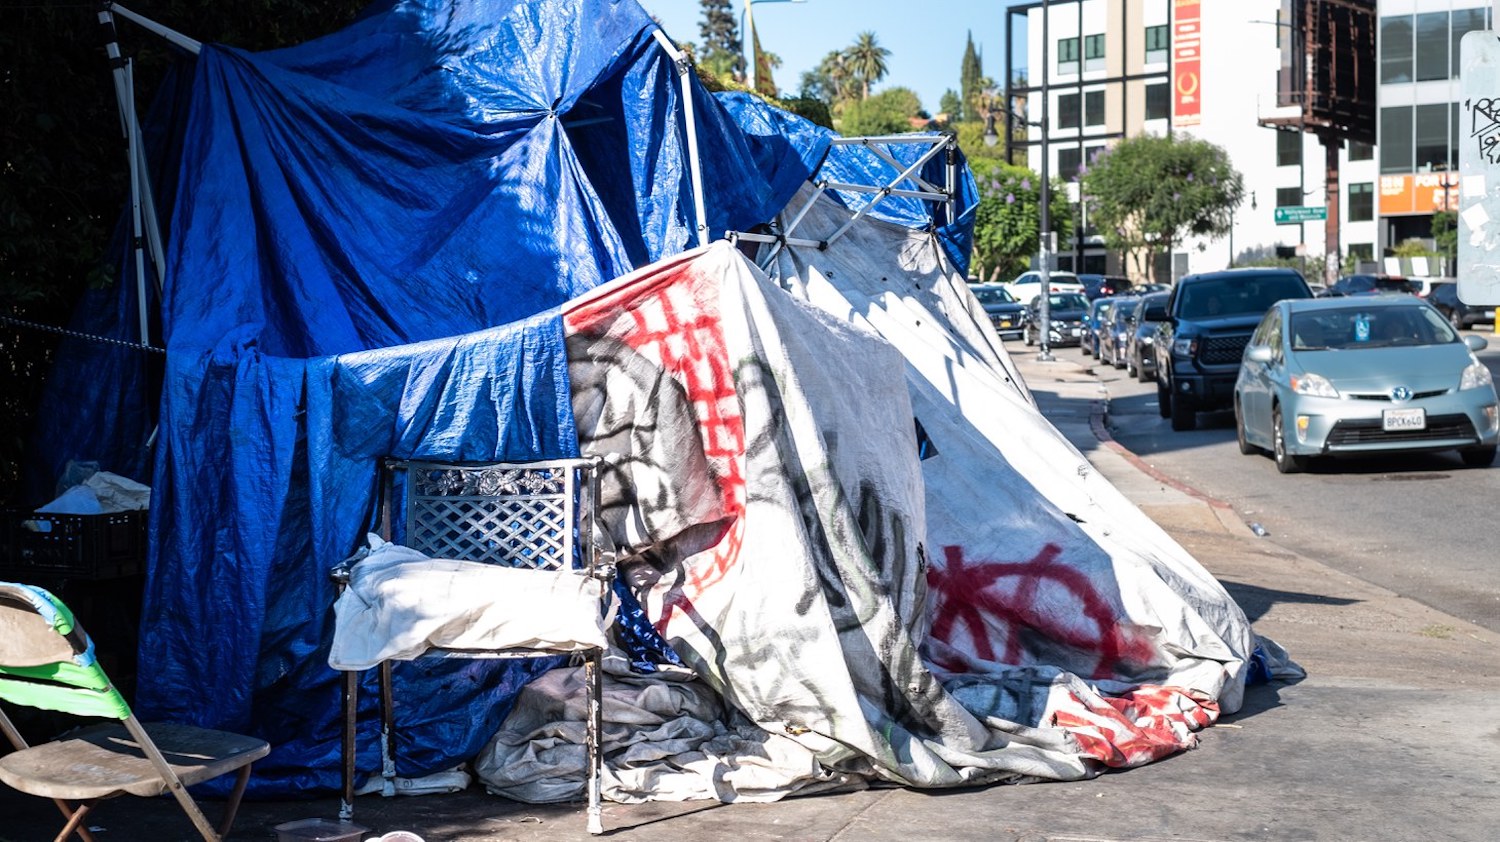 file shot of a tent on a city street